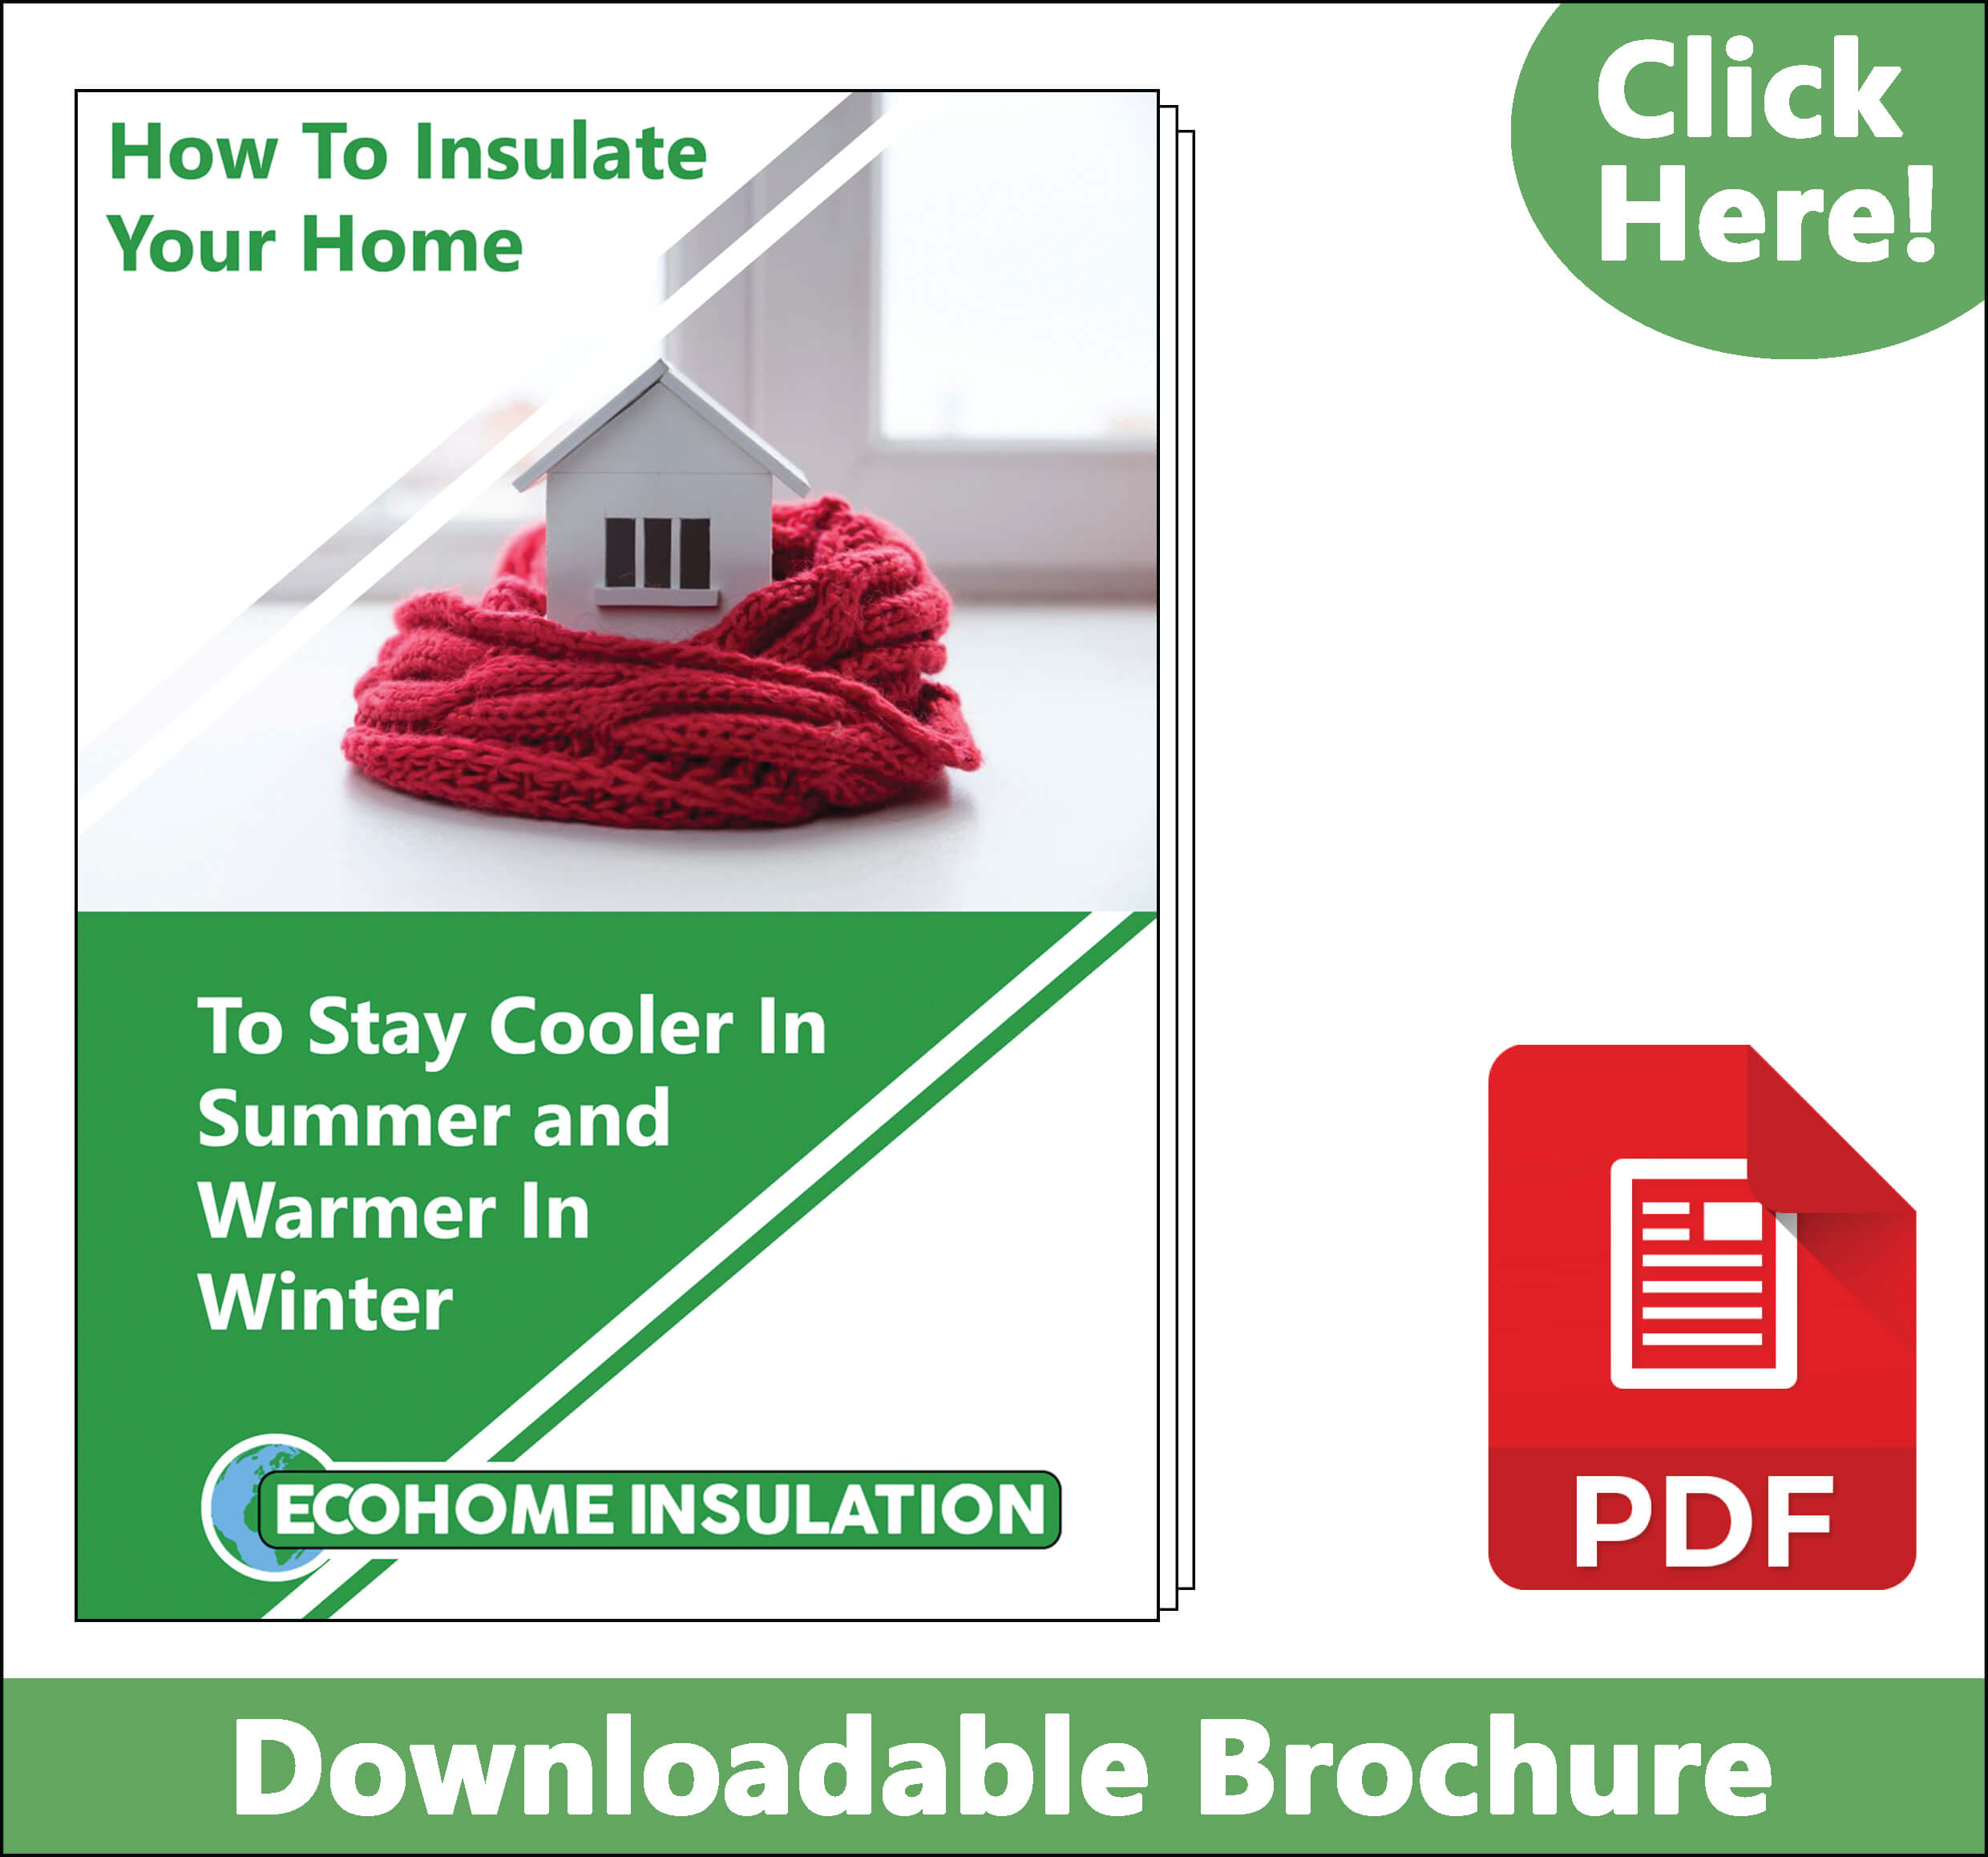 How to Insulate your Home